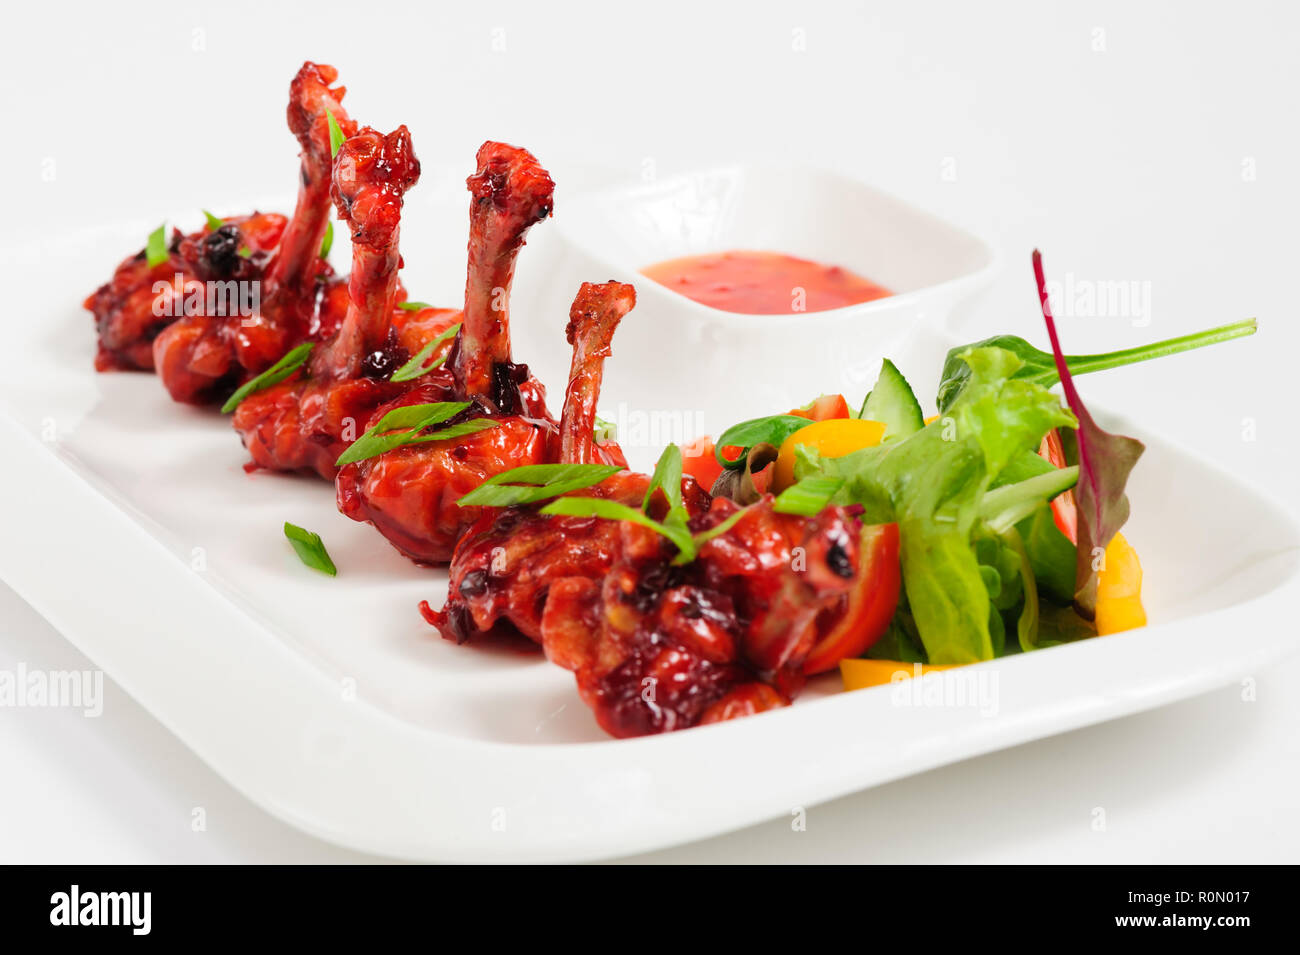 fried chicken wings in pomegranate sauce Stock Photo